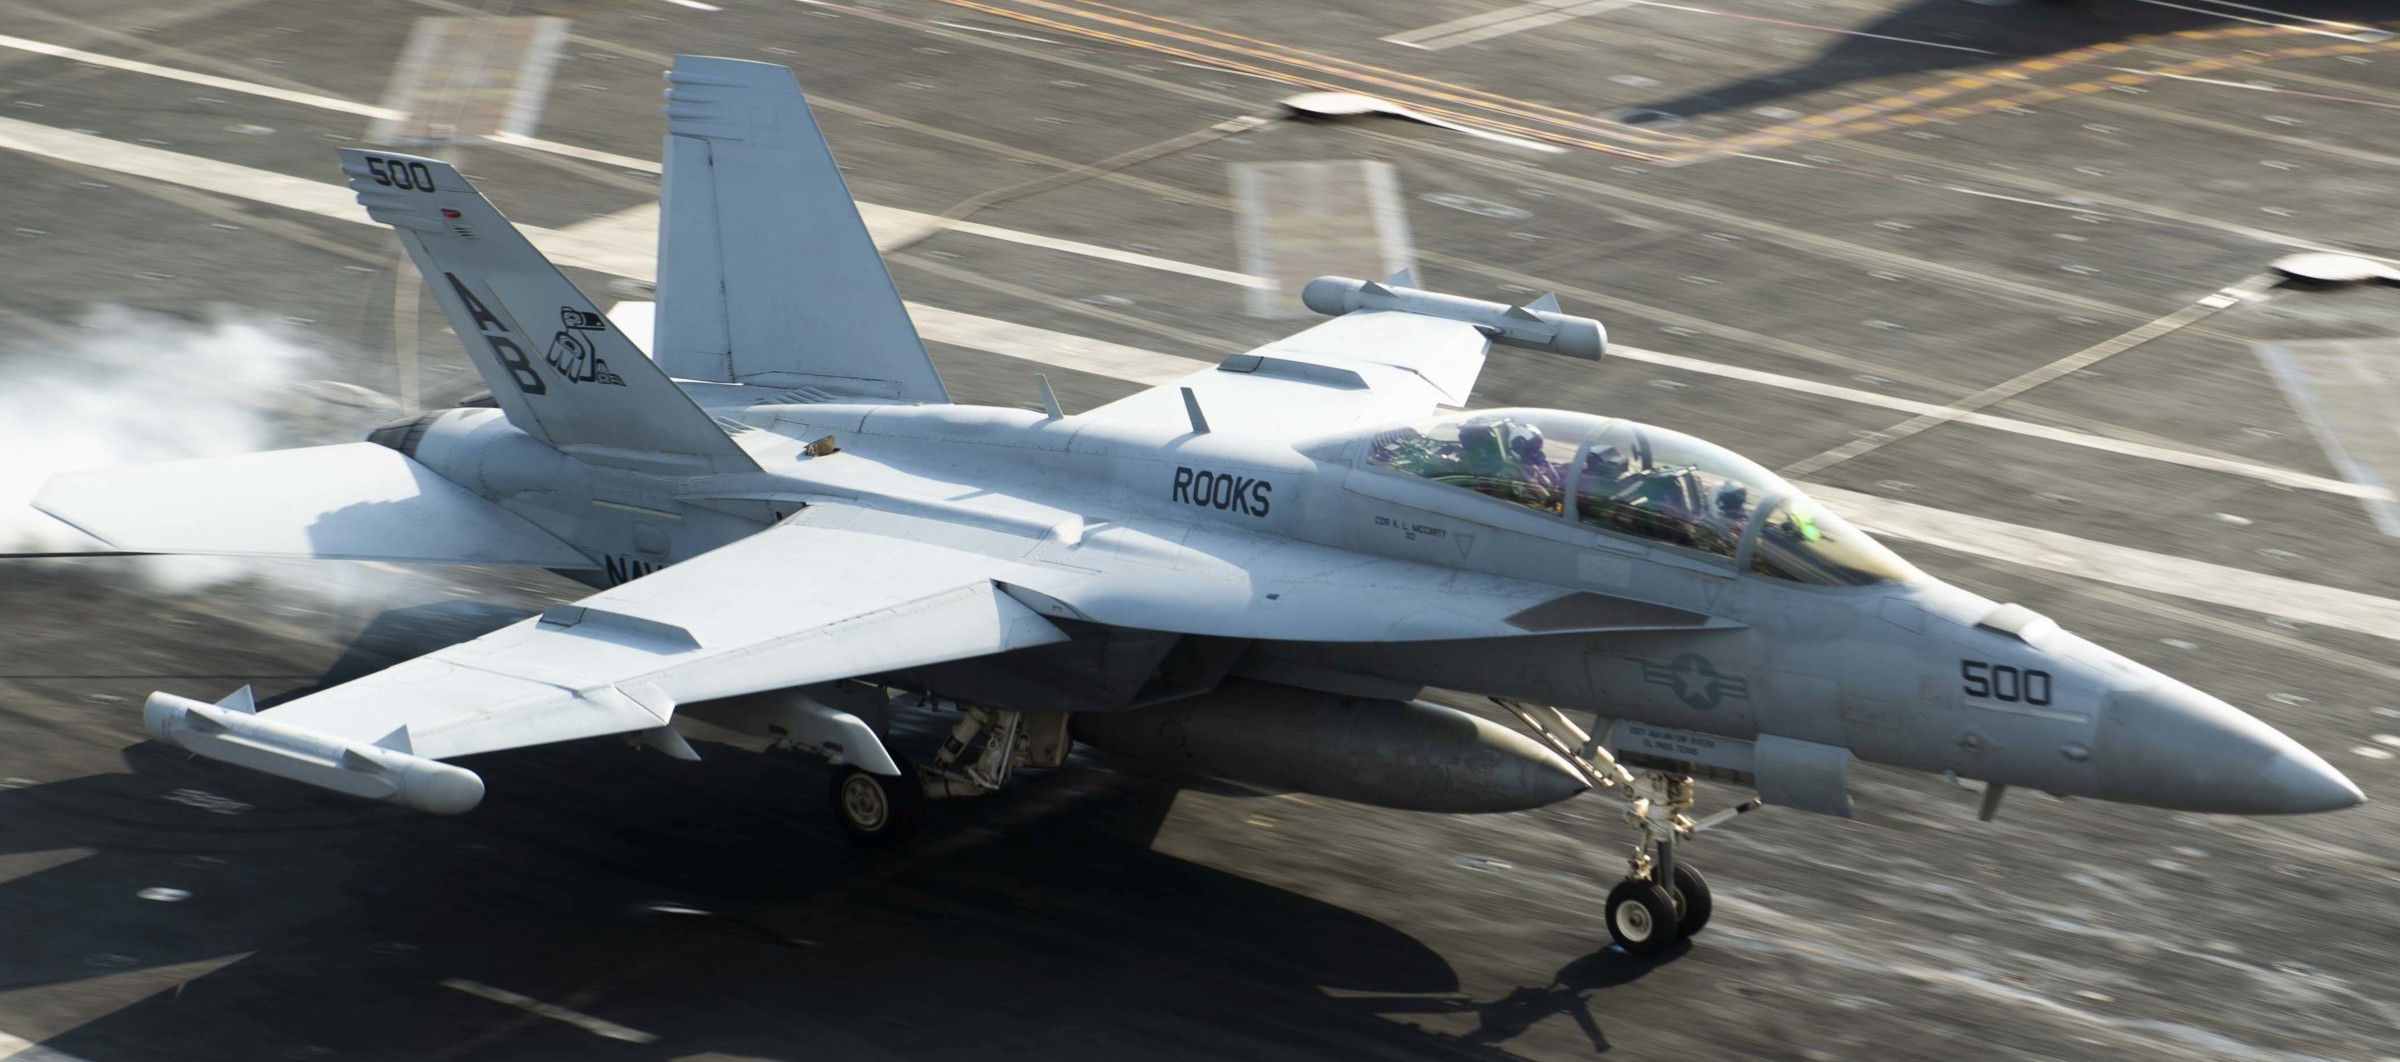 vaq-137 rooks electronic attack squadron us navy ea-18g growler carrier air wing cvw-1 uss harry s. truman cvn-75 78